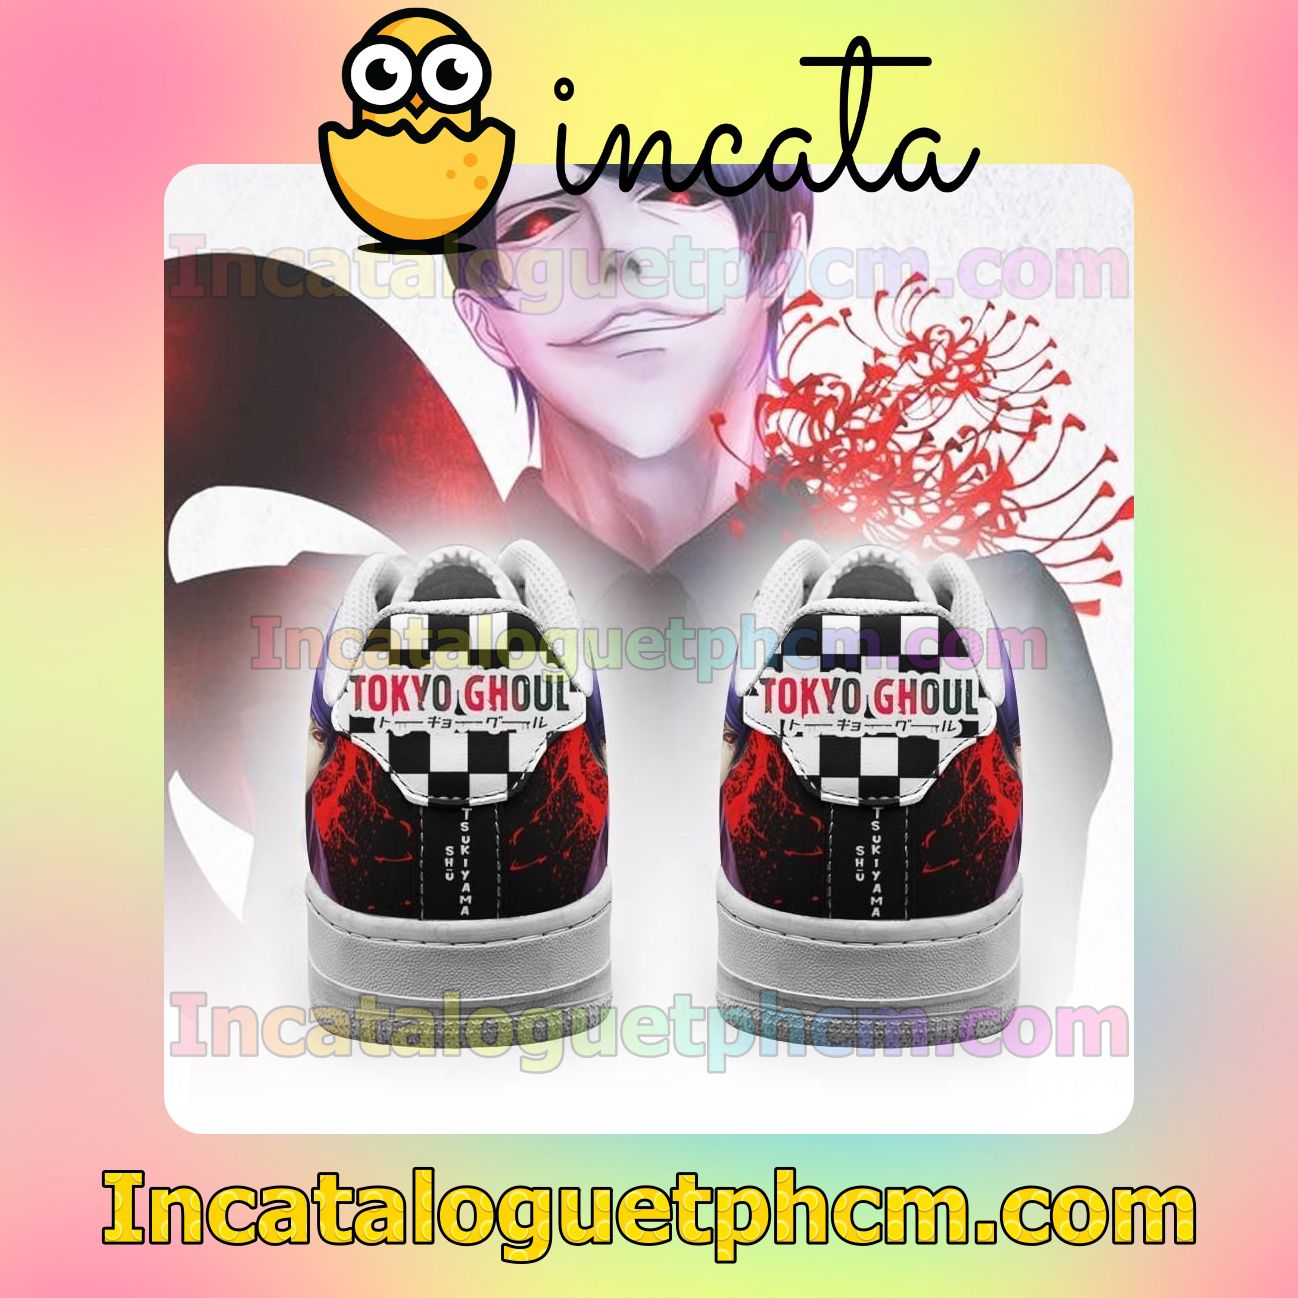 Official Tokyo Ghoul Tsukiyama Checkerboard Anime Nike Low Shoes Sneakers